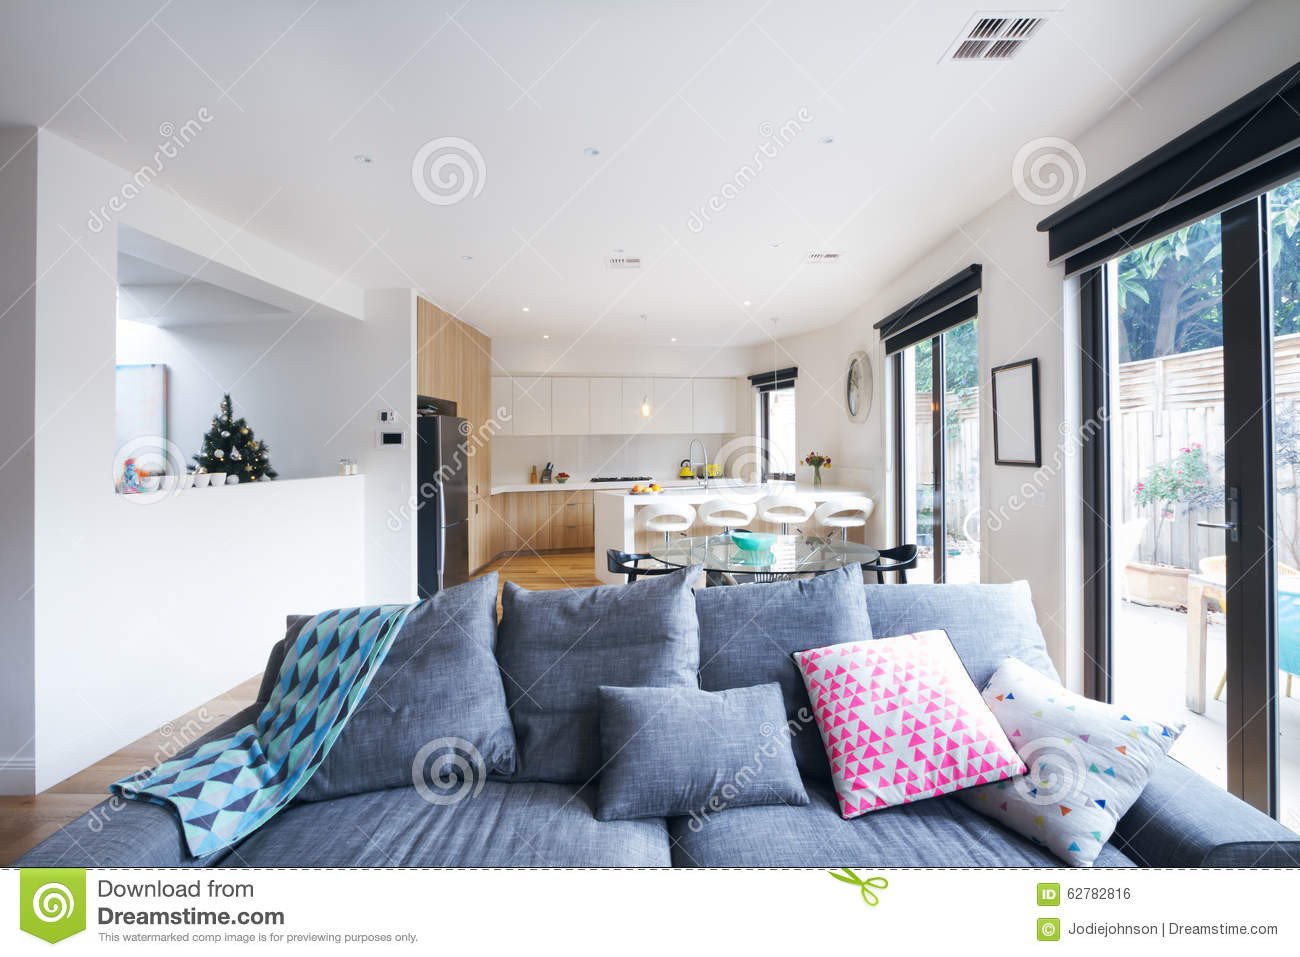 Comfortable Open Living Room Unique fortable Grey sofa In Open Plan Living Room Contemporary Home Stock Image